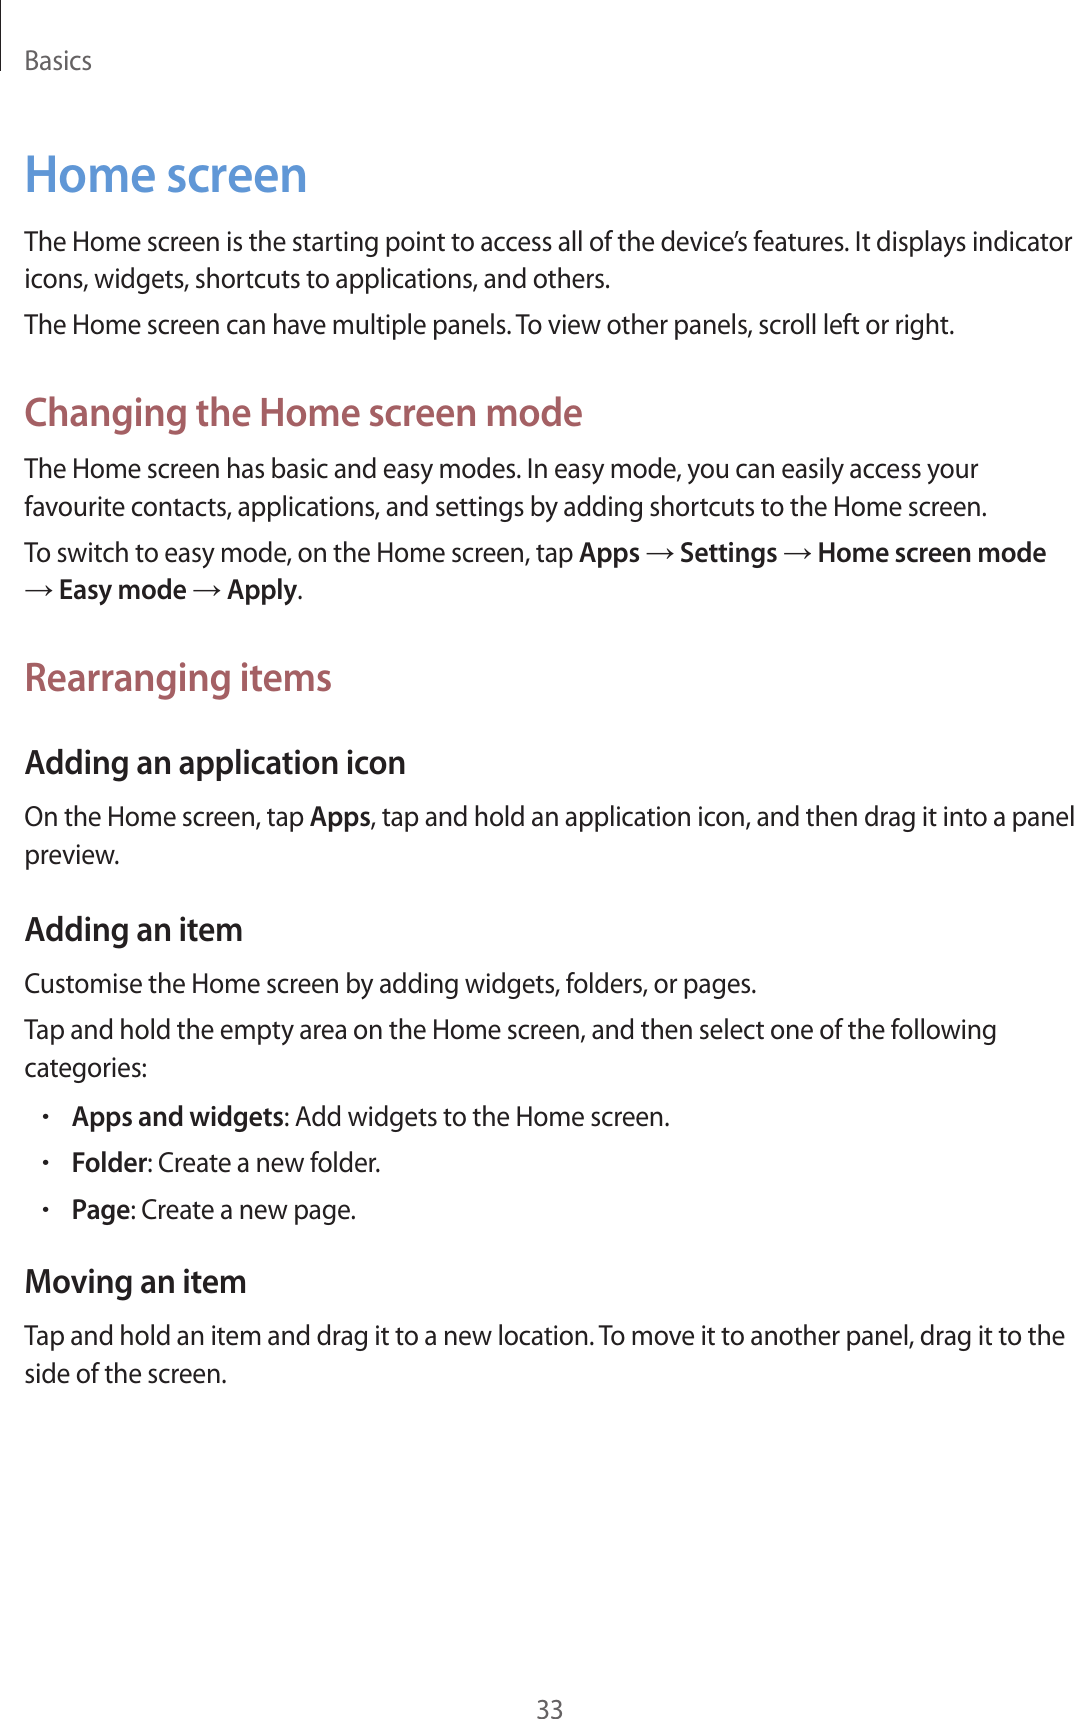 Basics33Home screenThe Home screen is the starting point to access all of the device’s features. It displays indicator icons, widgets, shortcuts to applications, and others.The Home screen can have multiple panels. To view other panels, scroll left or right.Changing the Home screen modeThe Home screen has basic and easy modes. In easy mode, you can easily access your favourite contacts, applications, and settings by adding shortcuts to the Home screen.To switch to easy mode, on the Home screen, tap Apps → Settings → Home screen mode → Easy mode → Apply.Rearranging itemsAdding an application iconOn the Home screen, tap Apps, tap and hold an application icon, and then drag it into a panel preview.Adding an itemCustomise the Home screen by adding widgets, folders, or pages.Tap and hold the empty area on the Home screen, and then select one of the following categories:•Apps and widgets: Add widgets to the Home screen.•Folder: Create a new folder.•Page: Create a new page.Moving an itemTap and hold an item and drag it to a new location. To move it to another panel, drag it to the side of the screen.